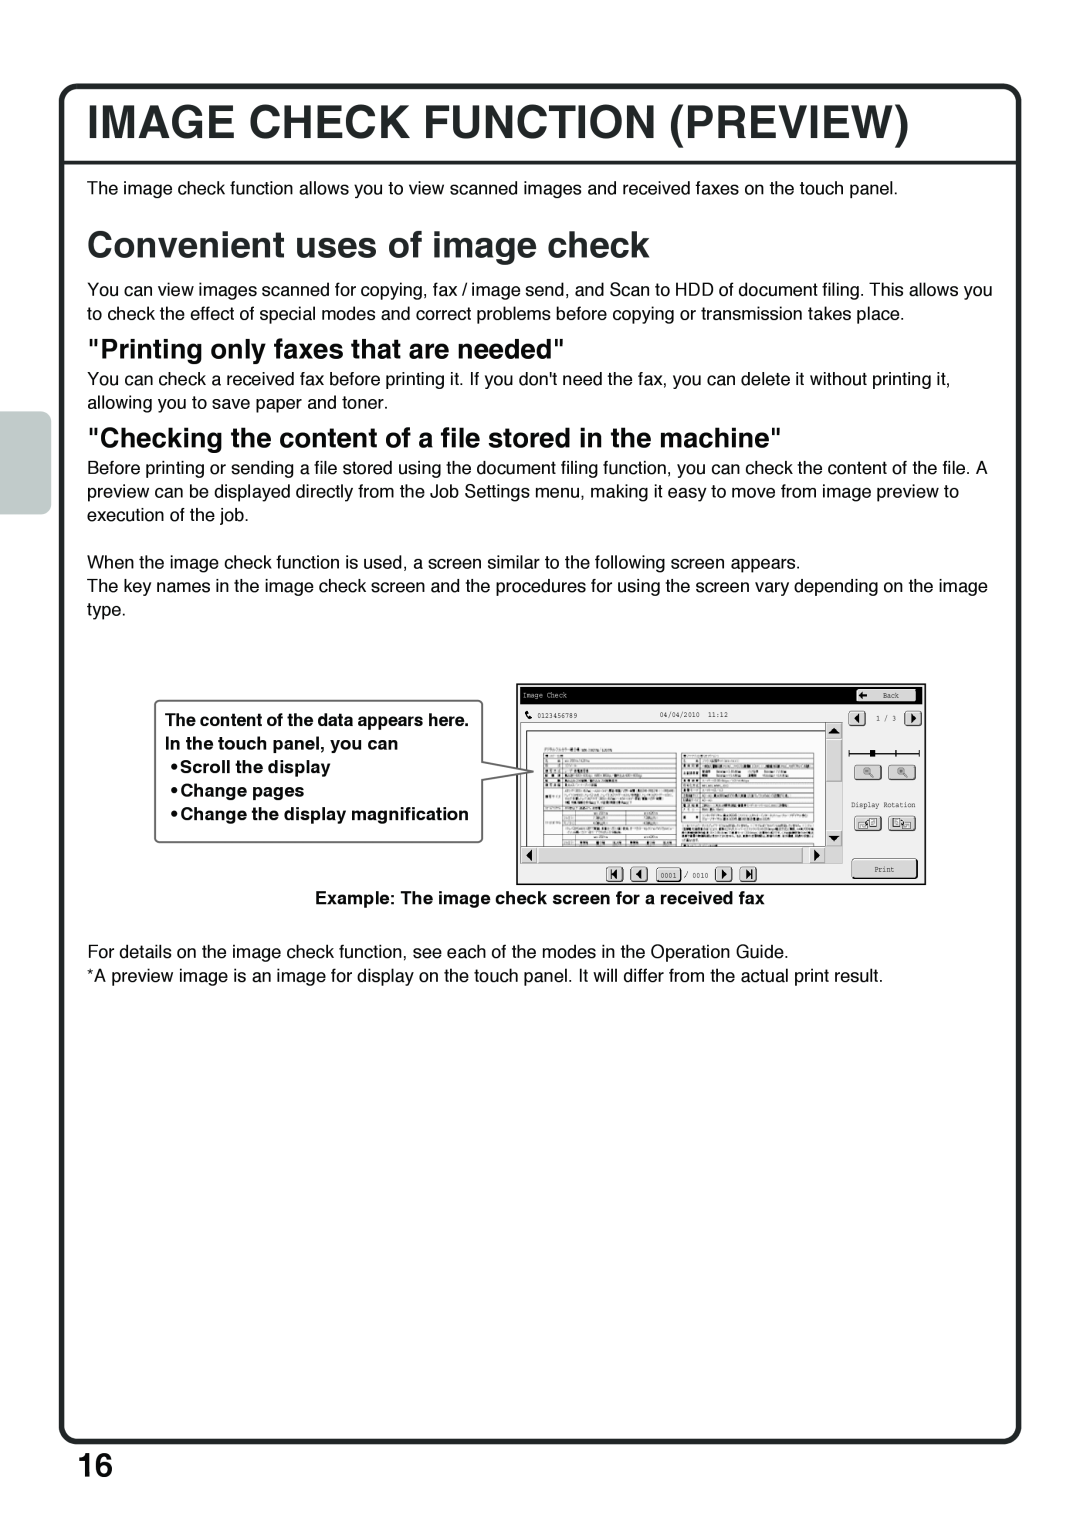 Sharp MX-4101N, MX-4100N Image Check Function Preview, Convenient uses of image check, Printing only faxes that are needed 